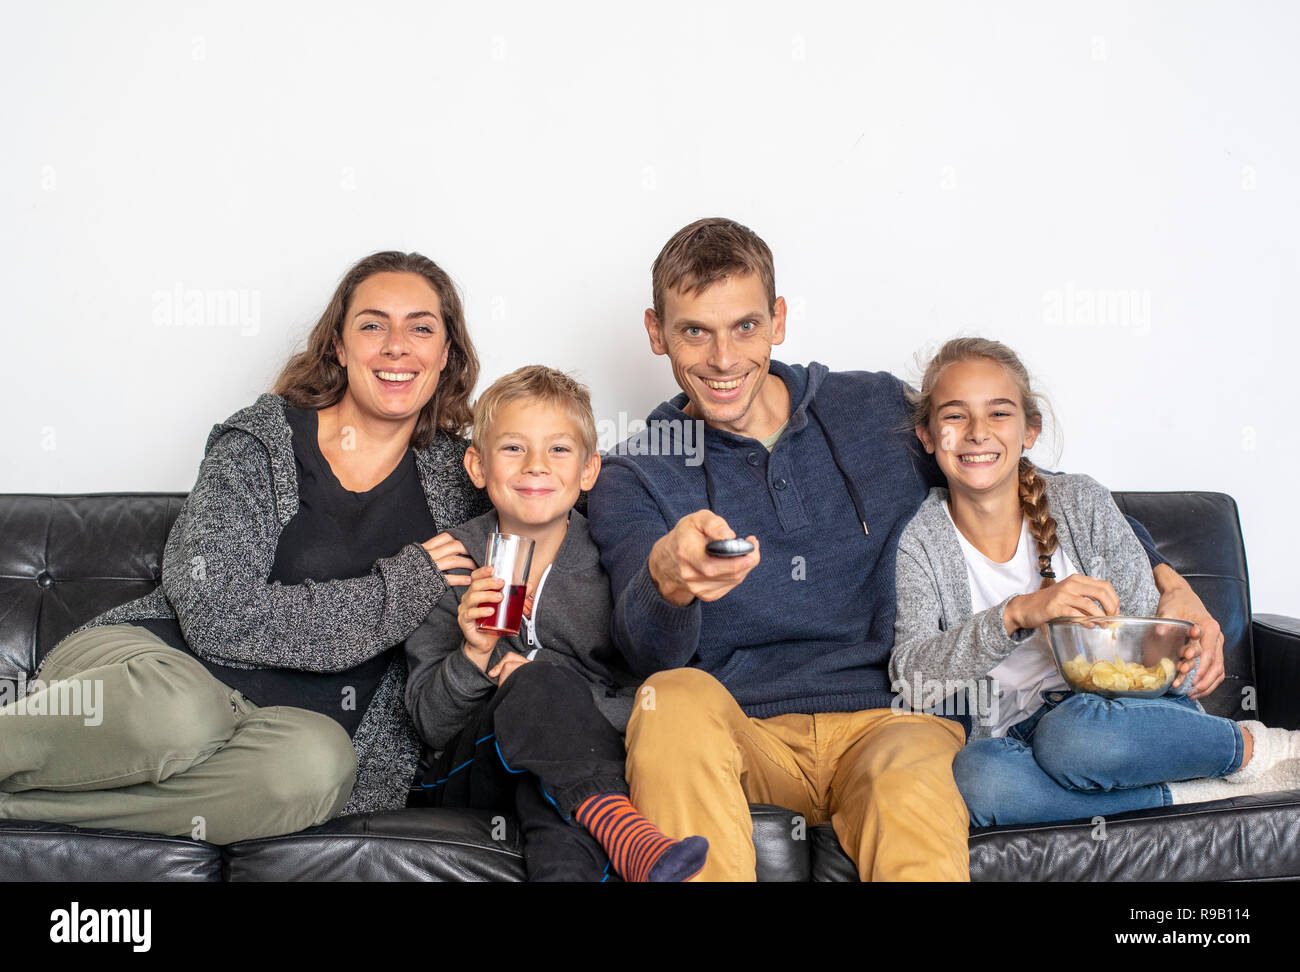 young family watching TV indoors. Front view people sitting on sofa looking at television. Stock Photo